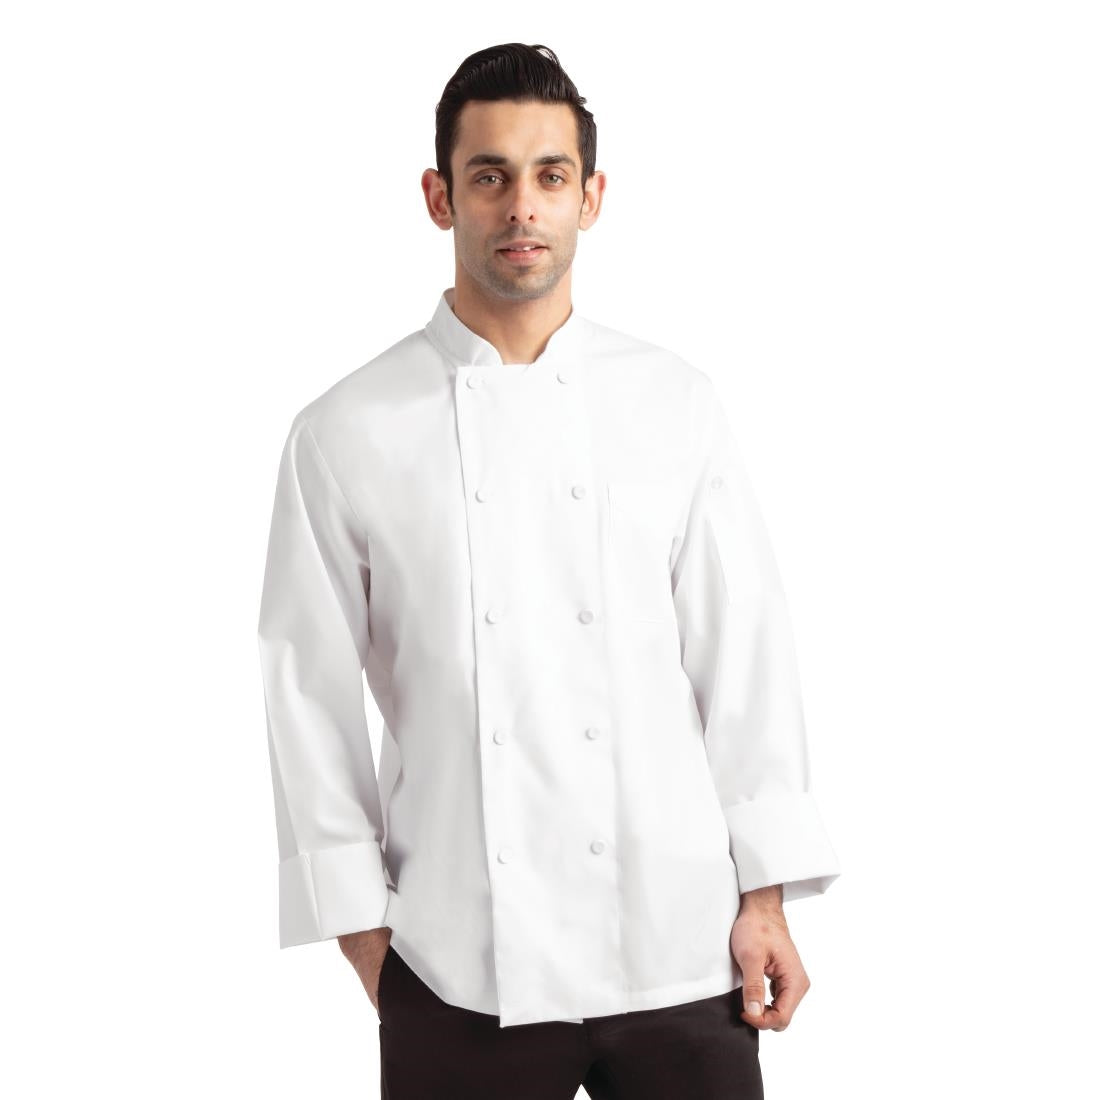 B649-L Chef Works Calgary Long Sleeve Cool Vent Unisex Chefs Jacket White L JD Catering Equipment Solutions Ltd